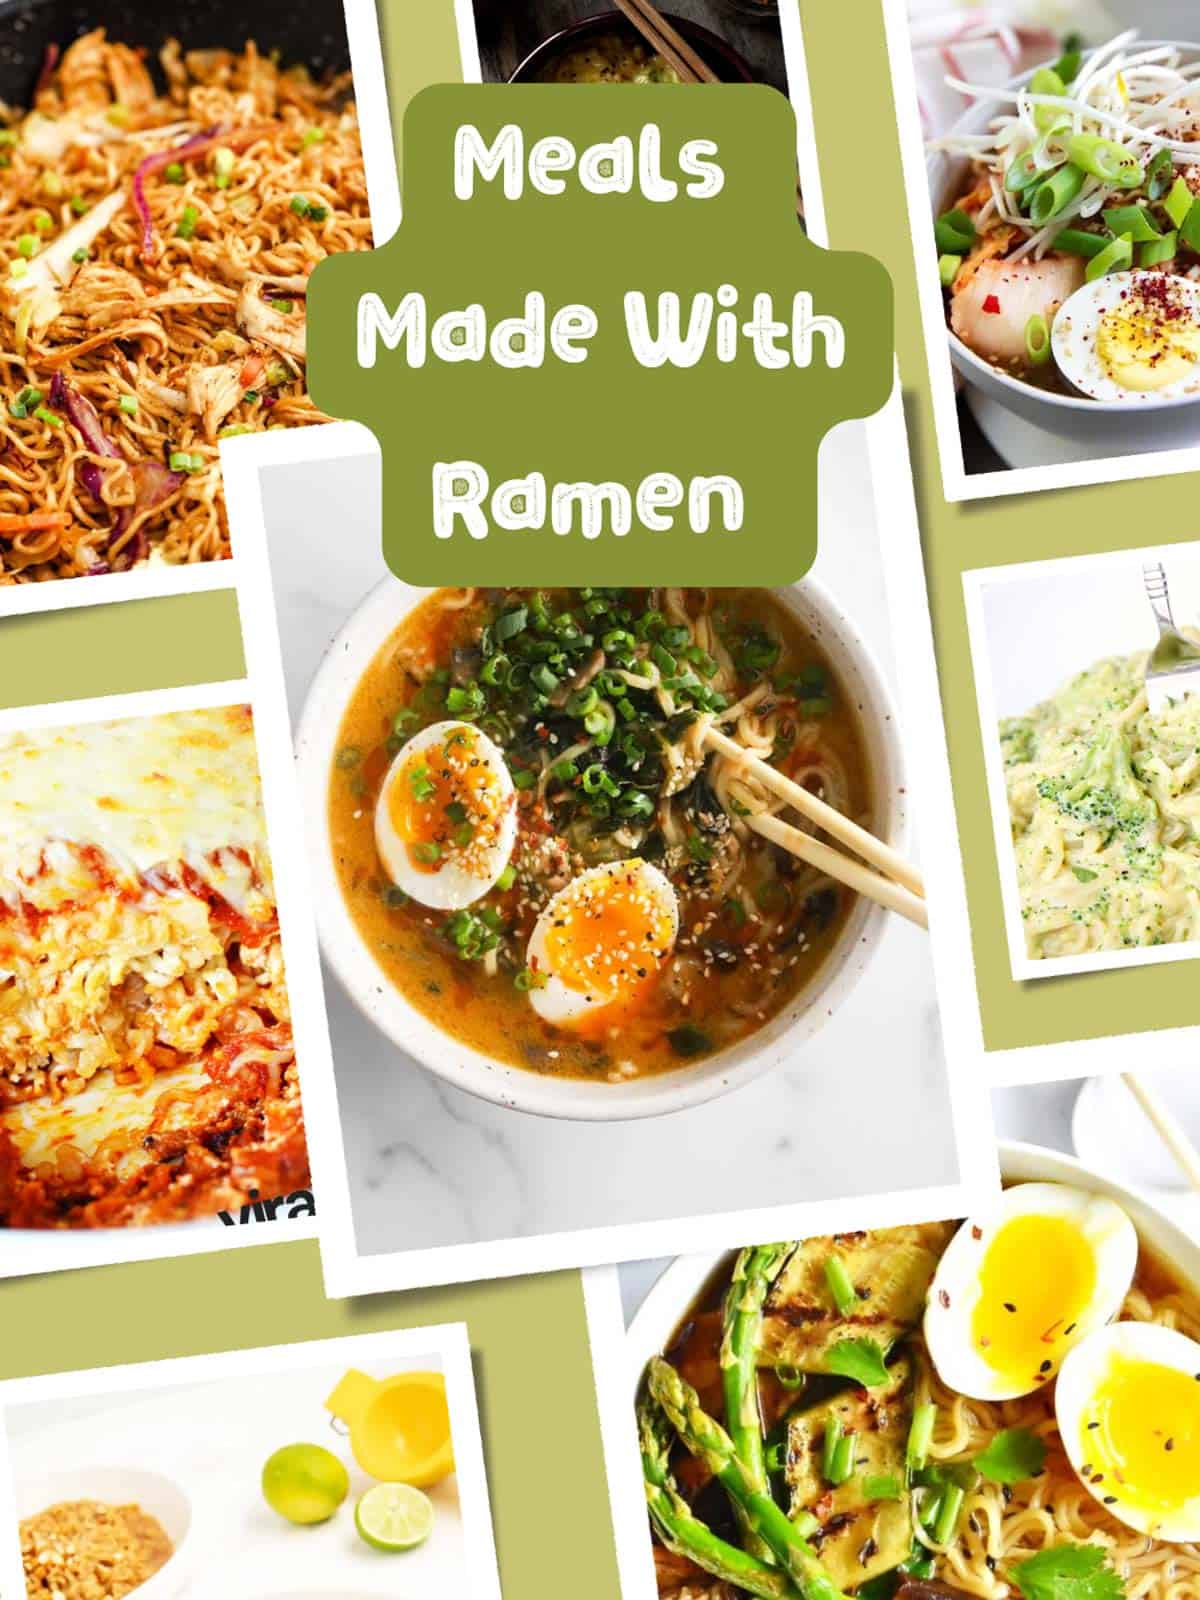 Collage of dishes made with ramen noodles.